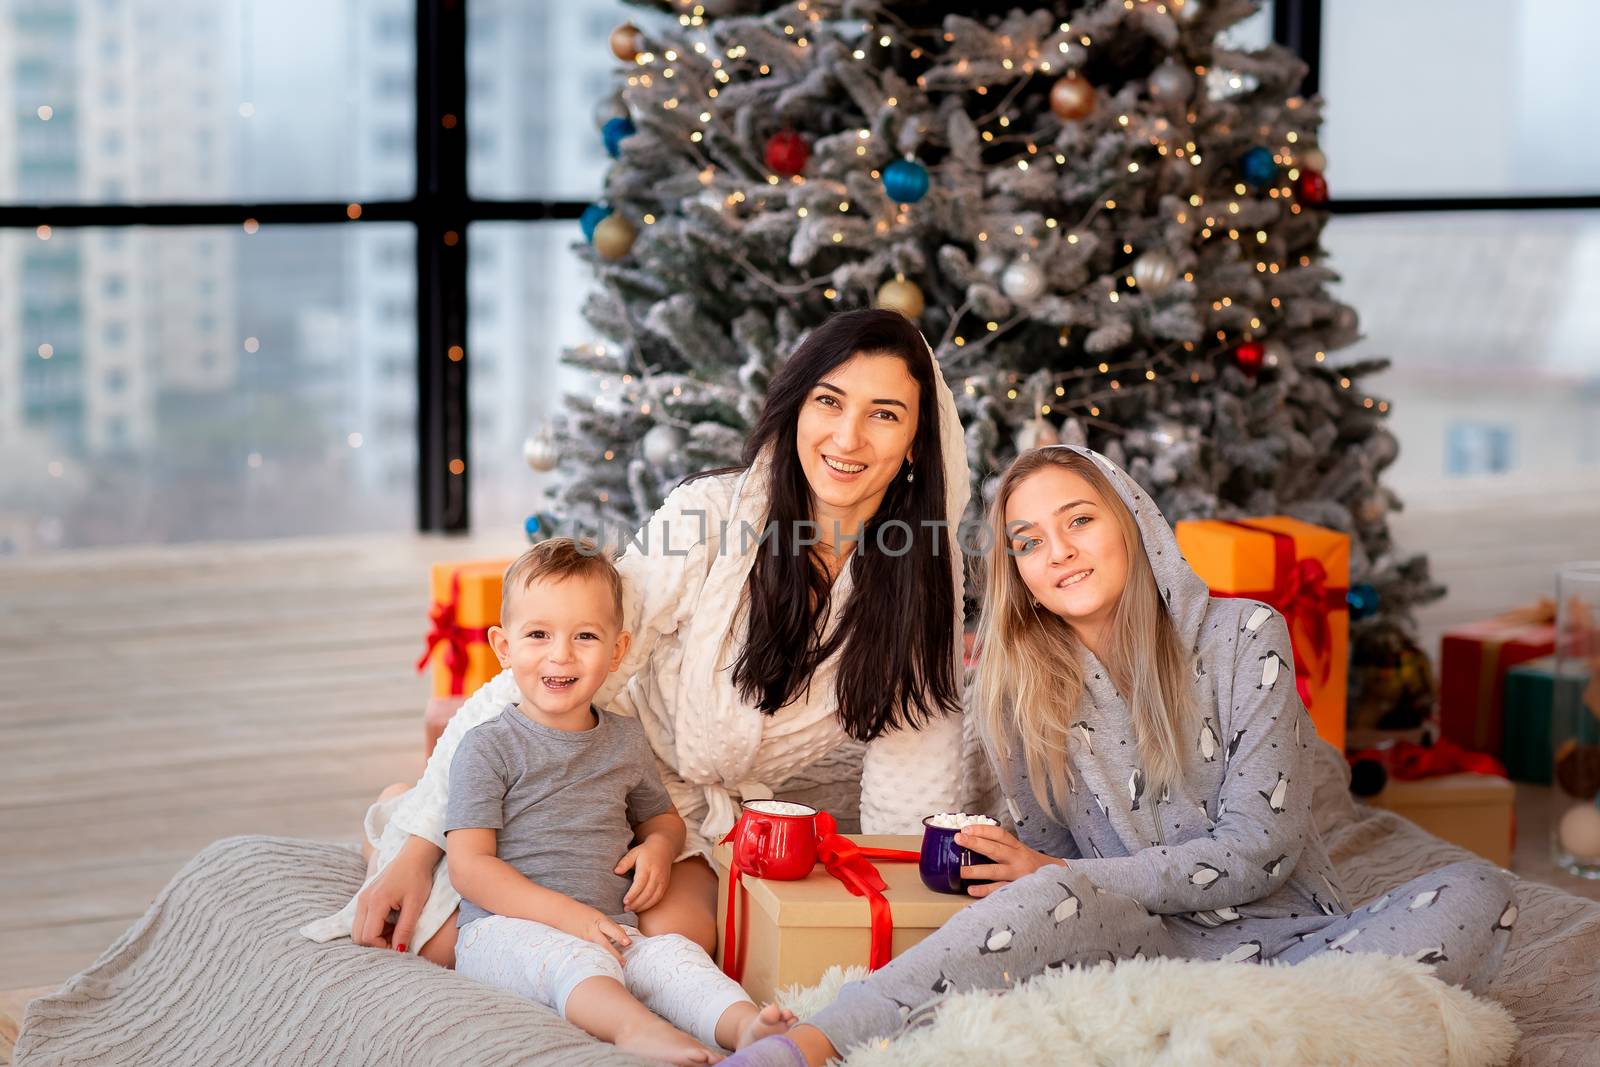 Happy cheerful family near Christmas tree. Mother and kids wearing pajama having fun near tree in the morning. Merry Christmas and Happy Holidays concept